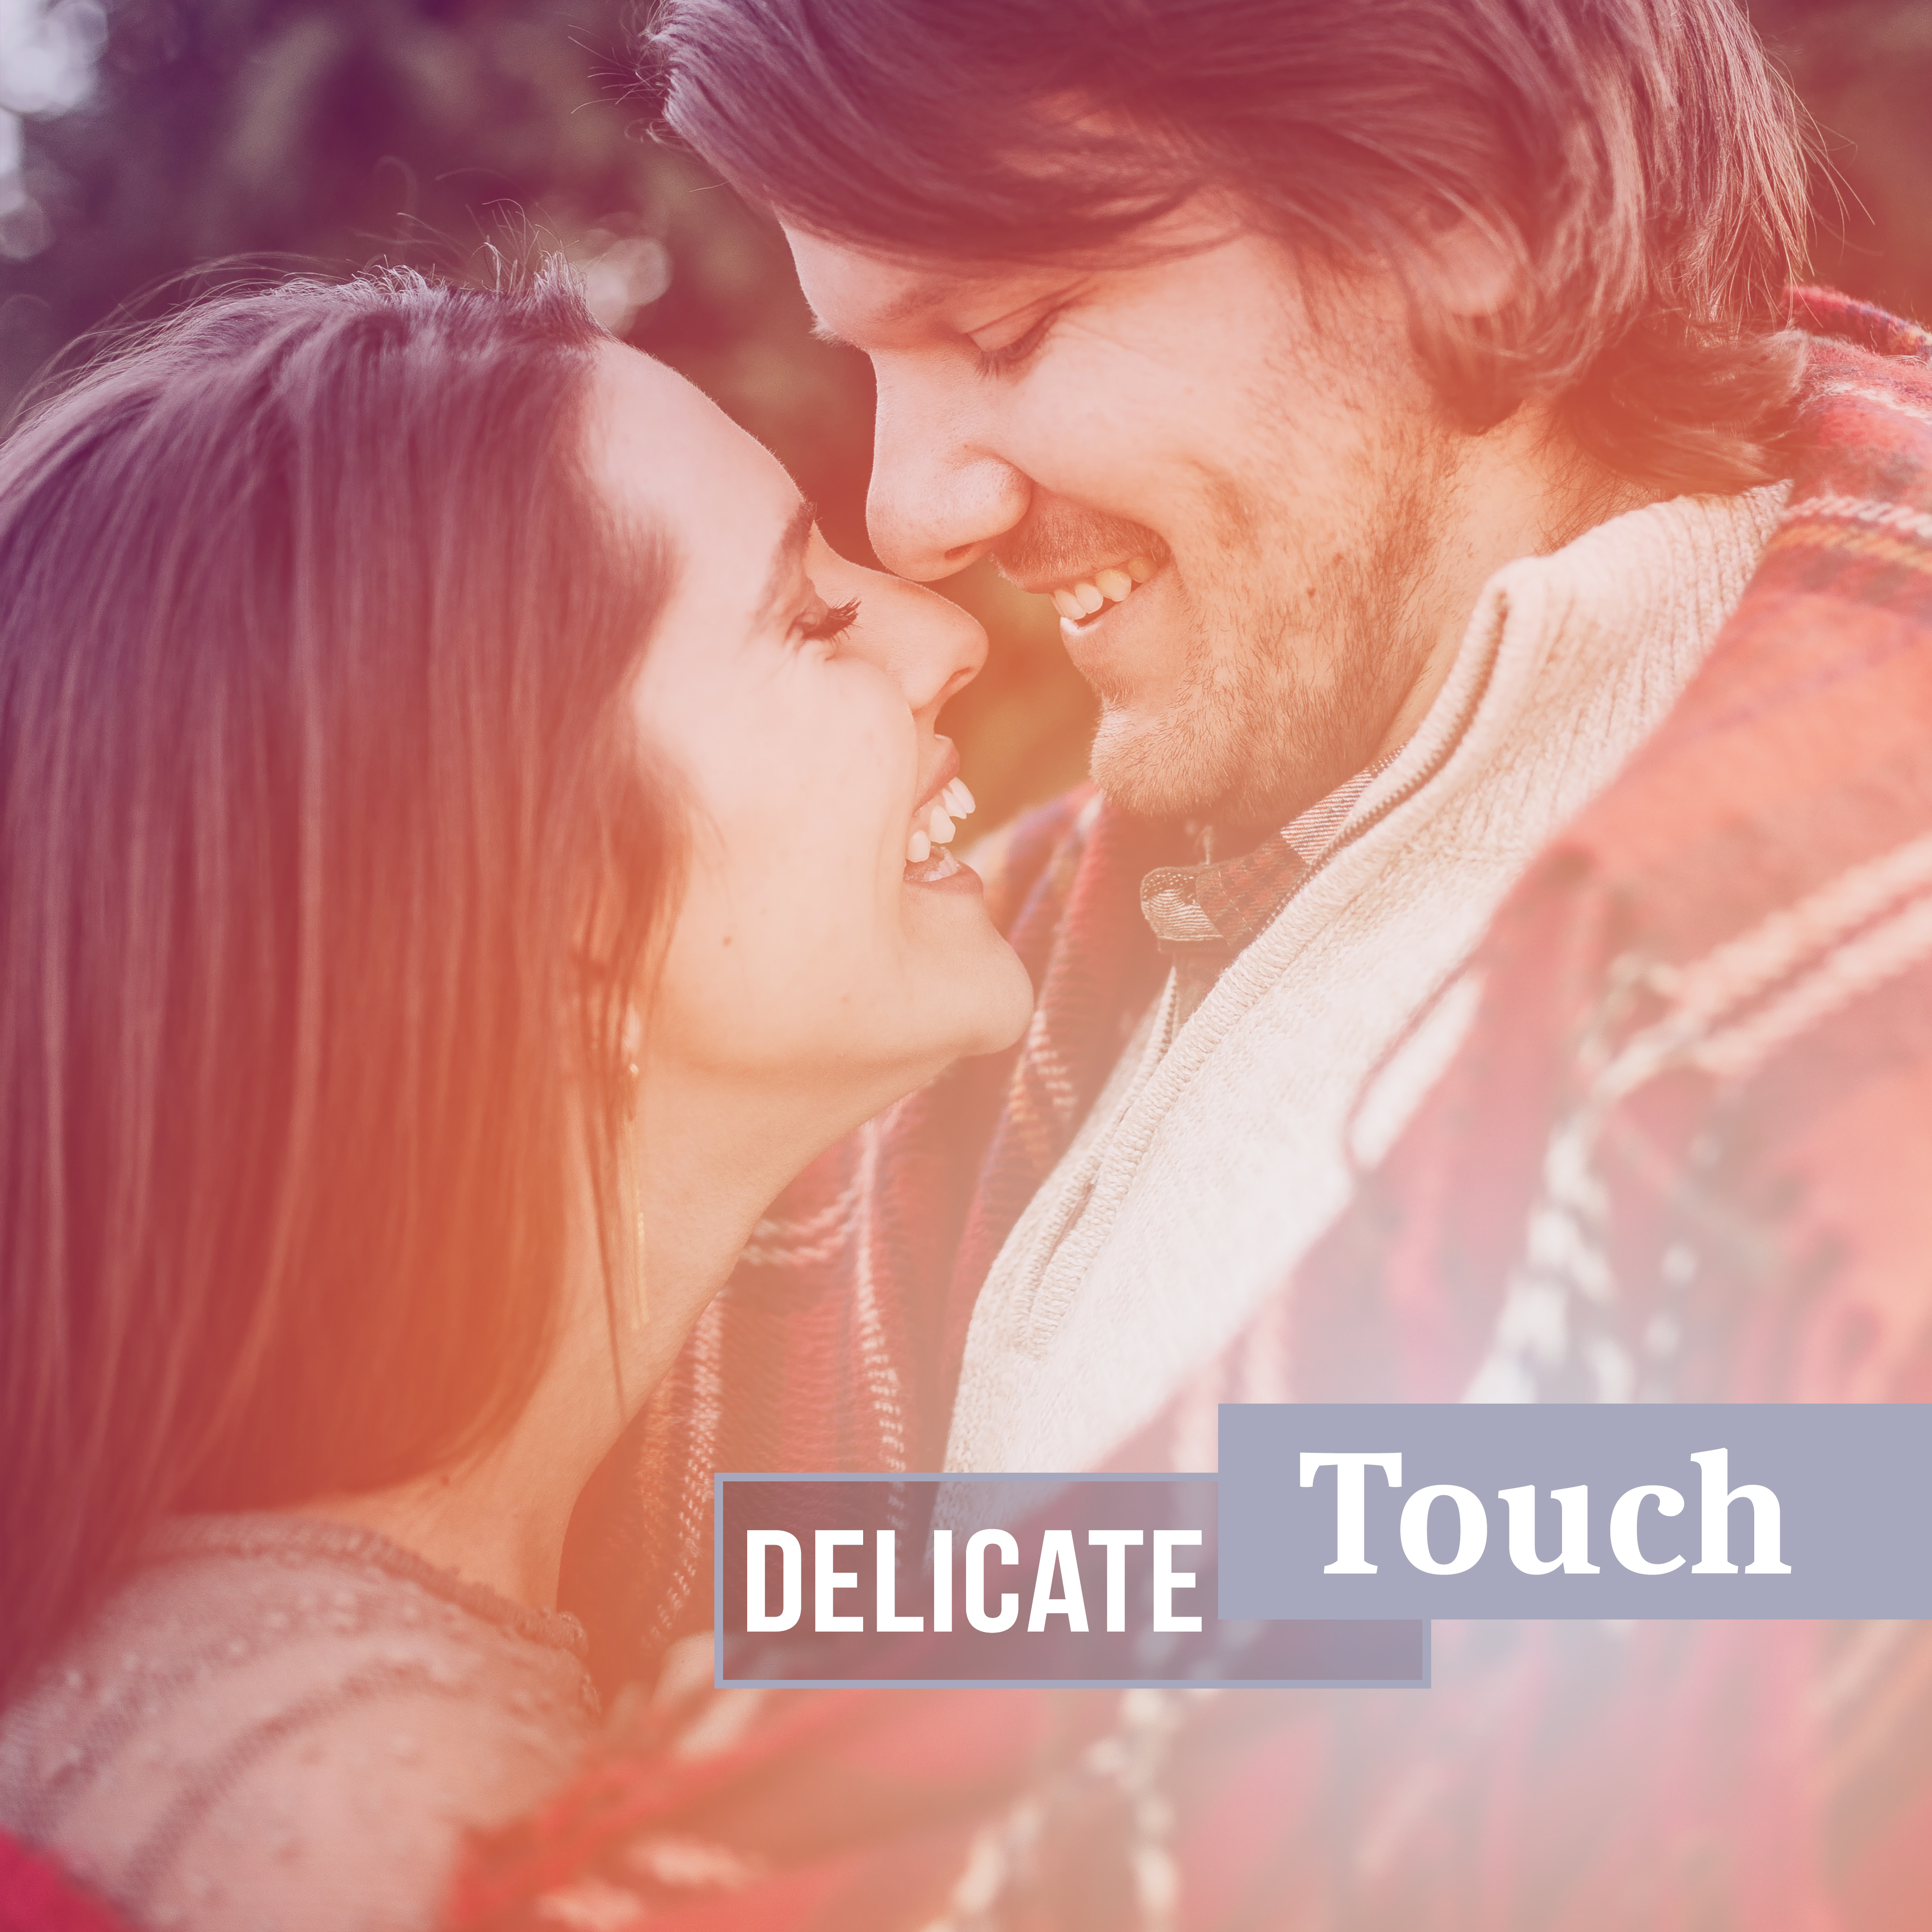 Delicate Touch – Sensual Music, Deep Relax, Soft Sounds, Sexy Ambient Sounds, Romantic Evening, Nature Sounds